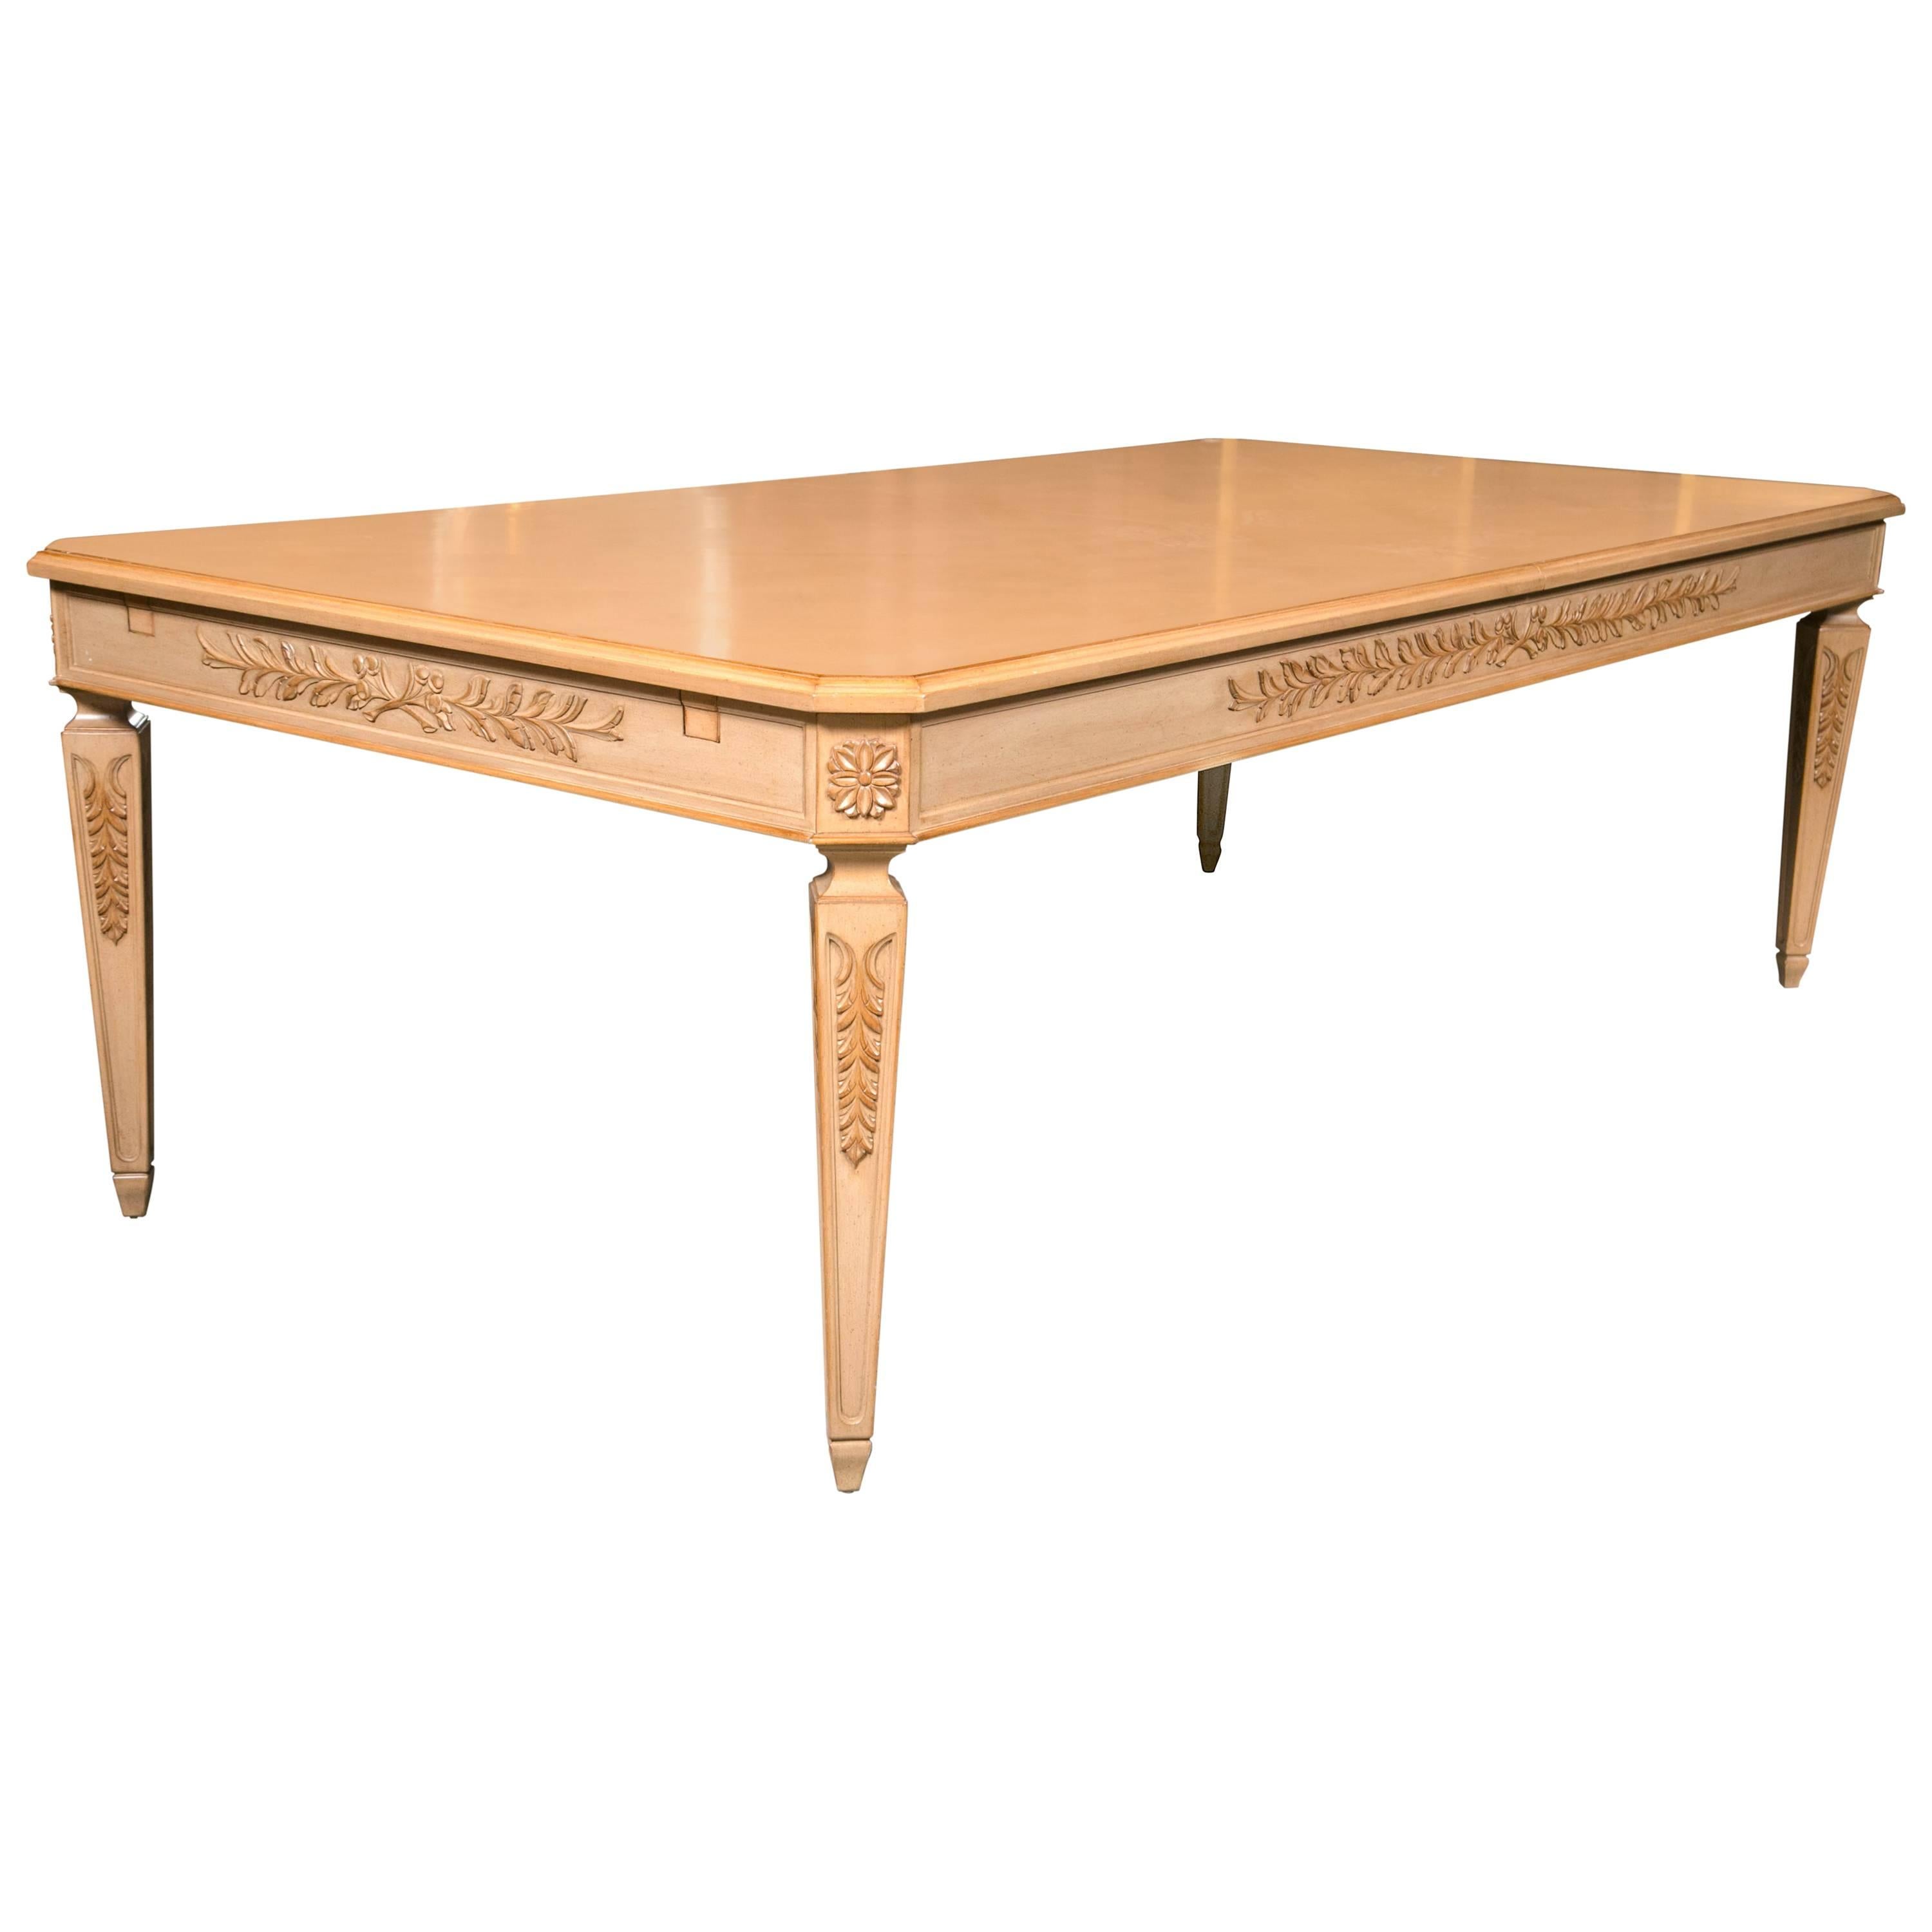 Monumental Louis XVI Style Blonde Wood Dining Table